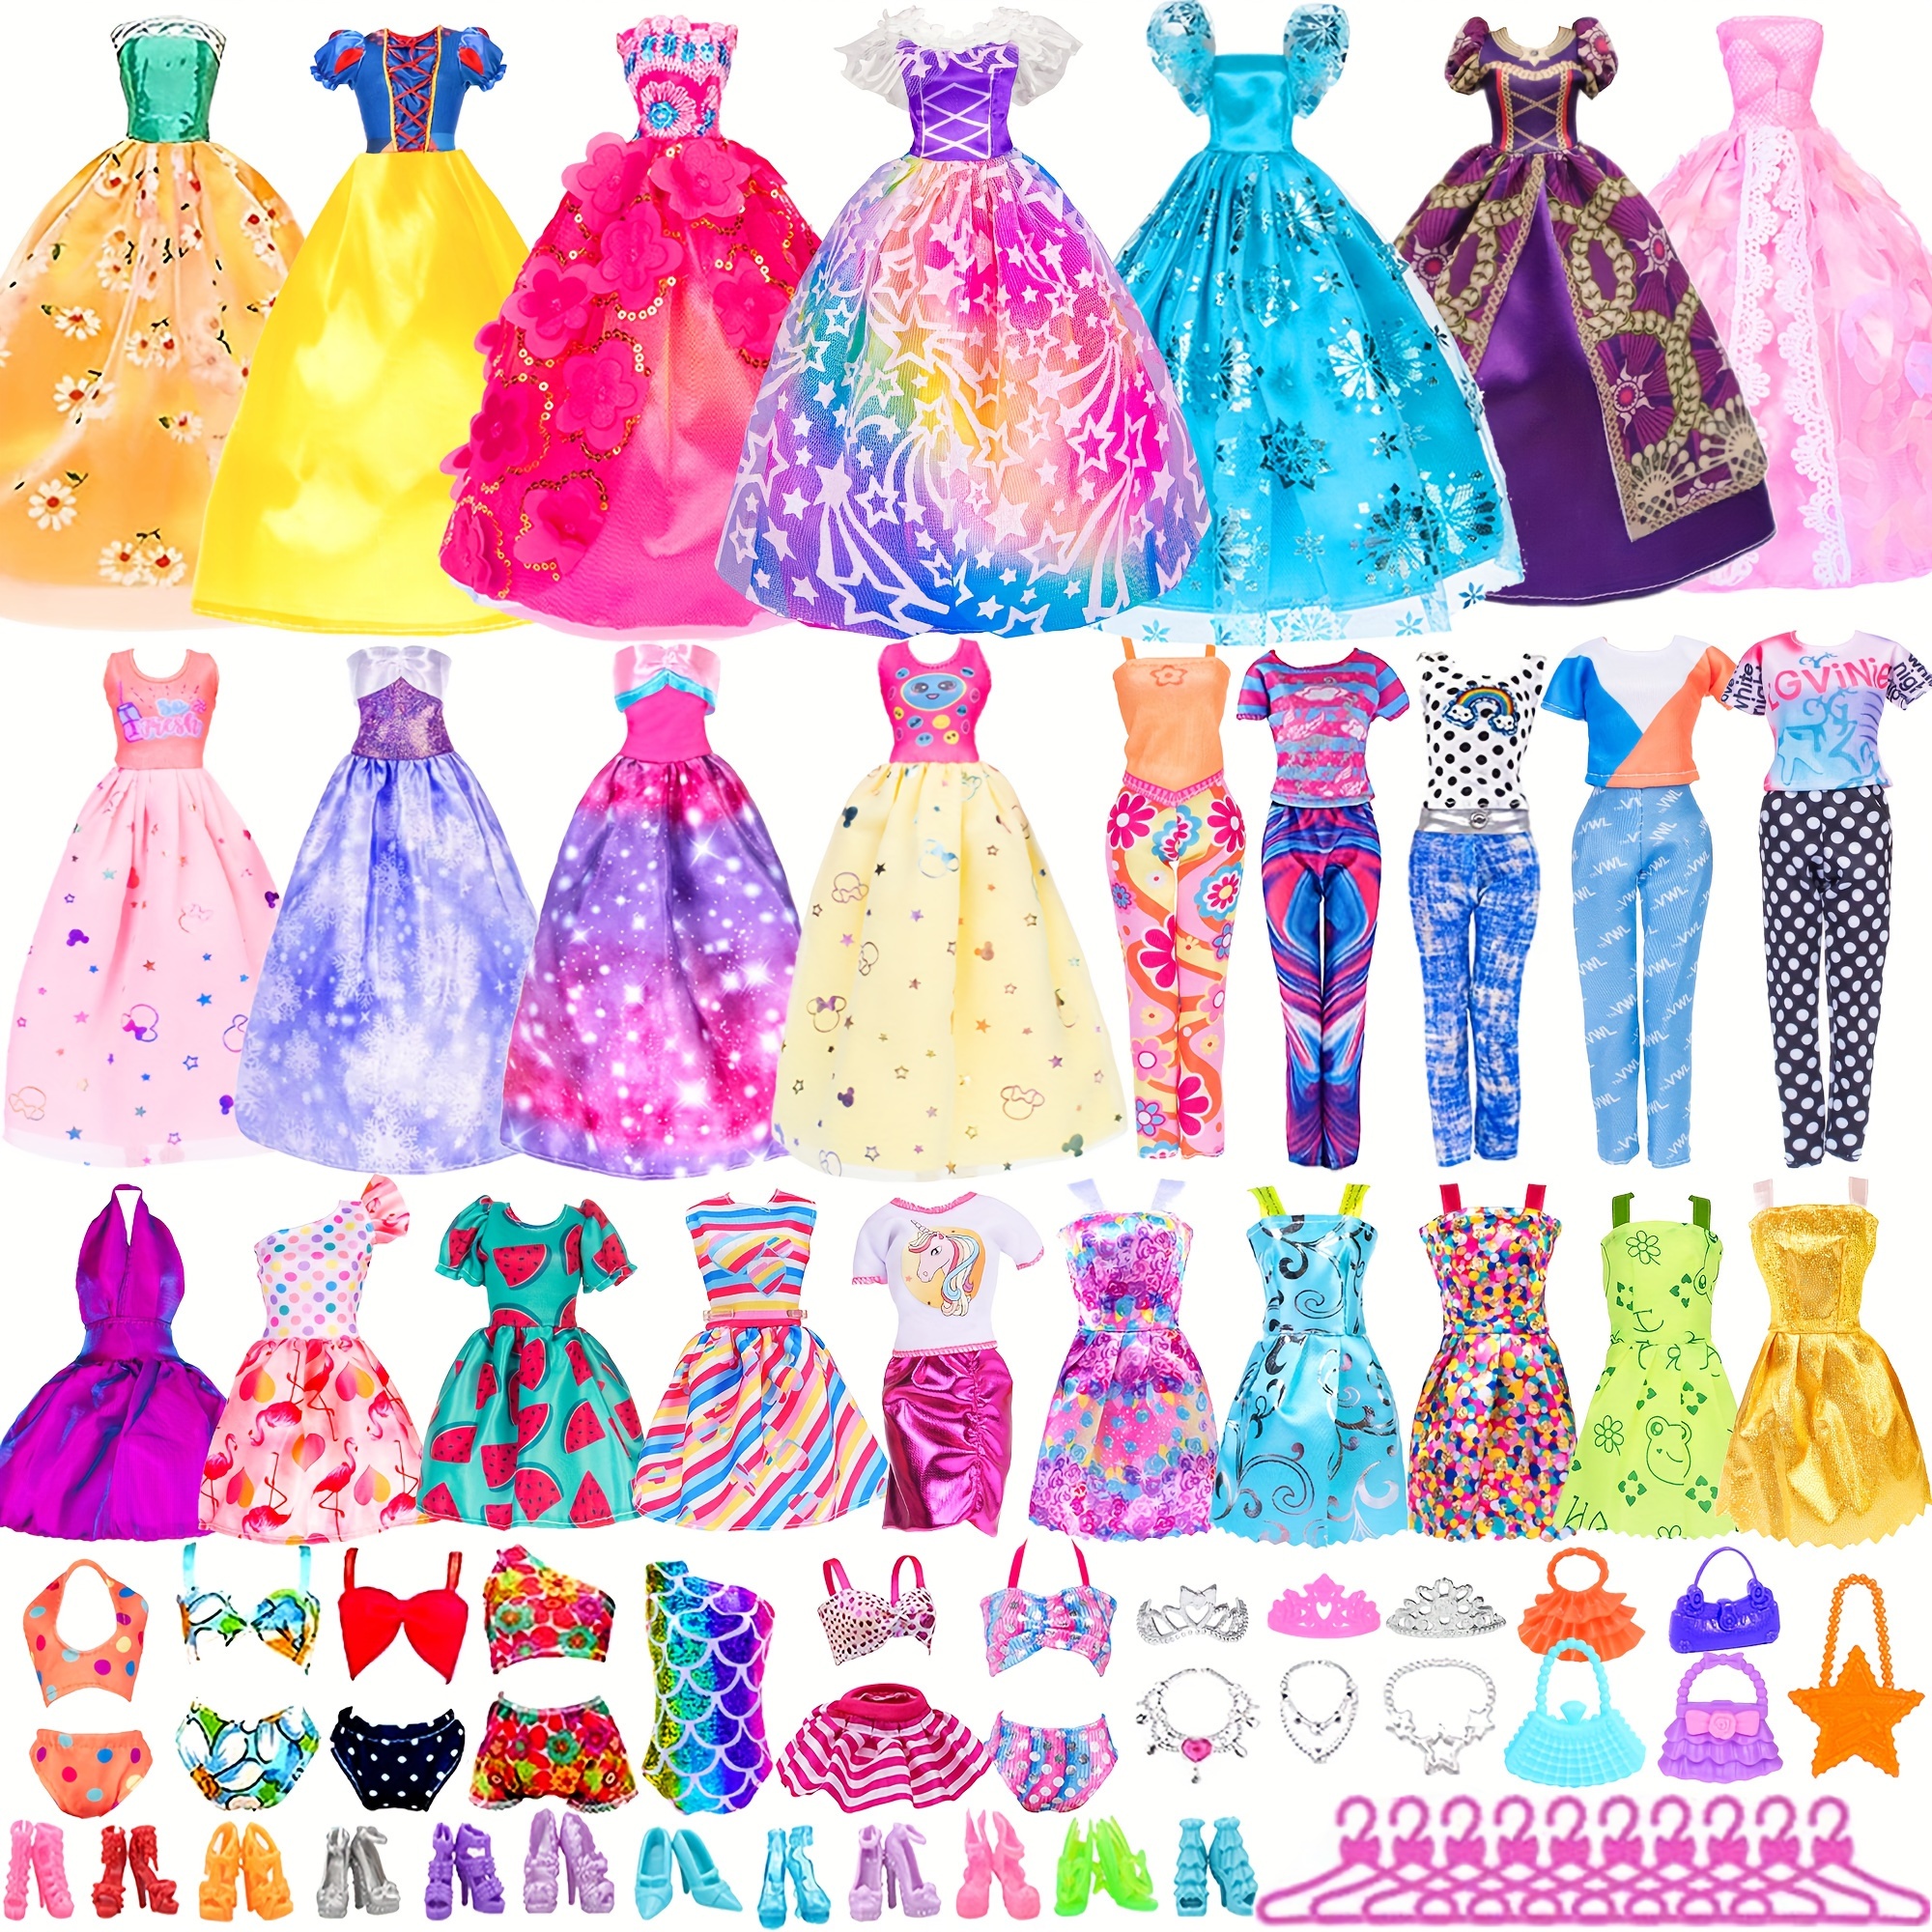 

48pcs 11.5 Inch Girl Doll Clothes And Accessories, 2 Long Princess Dress, 2 Party Dresses, 2 Short Dresses, Outfits, Slip Skirts, Bikinis (no Doll)